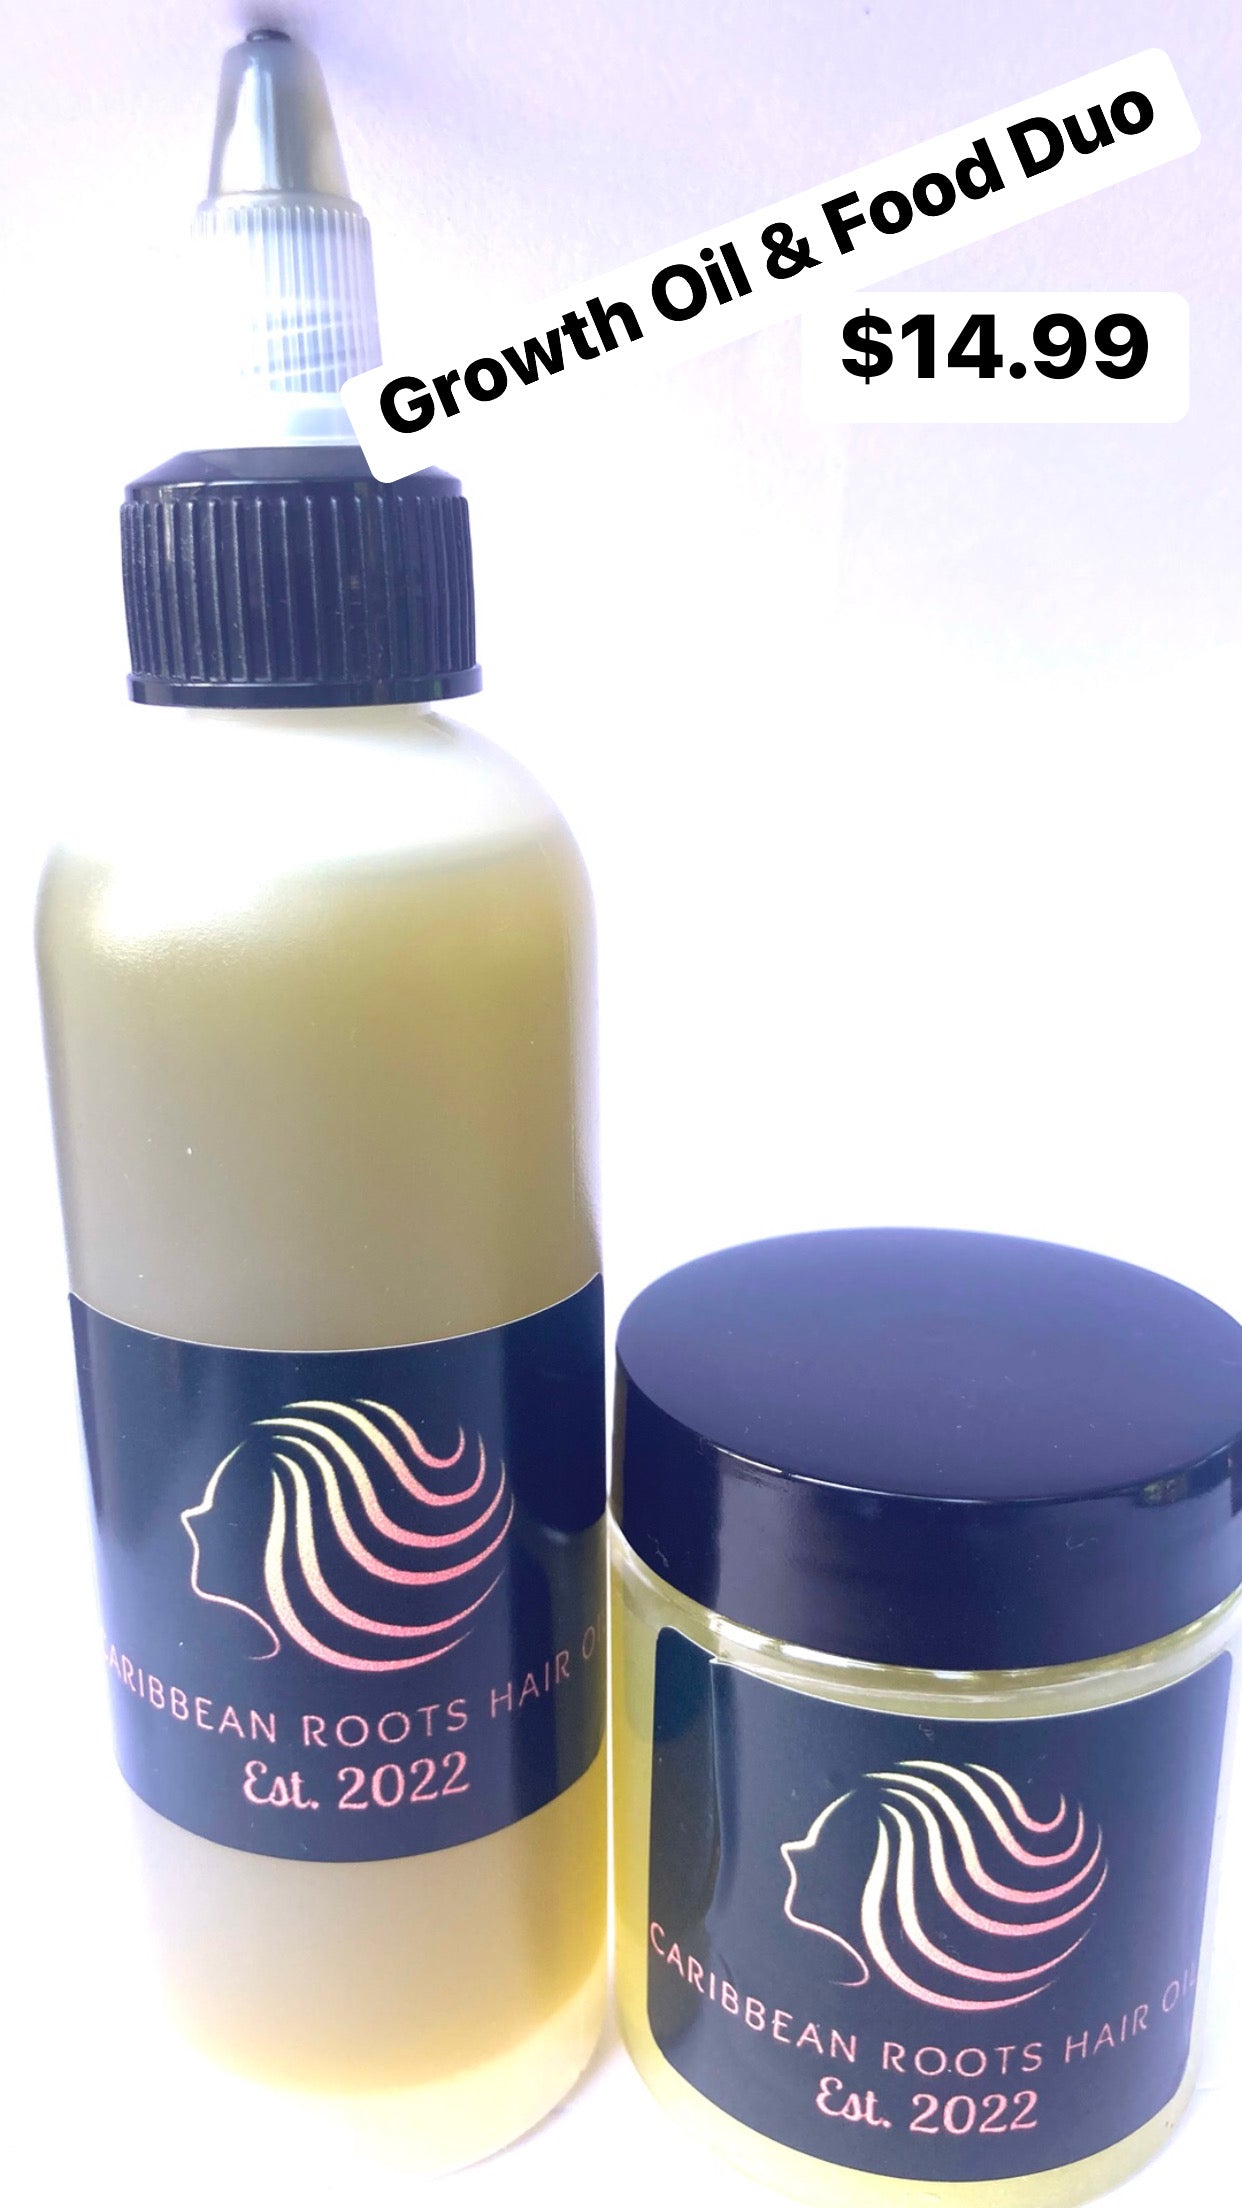 Growth Oil Duo (Original)4oz Set by Caribbean Roots